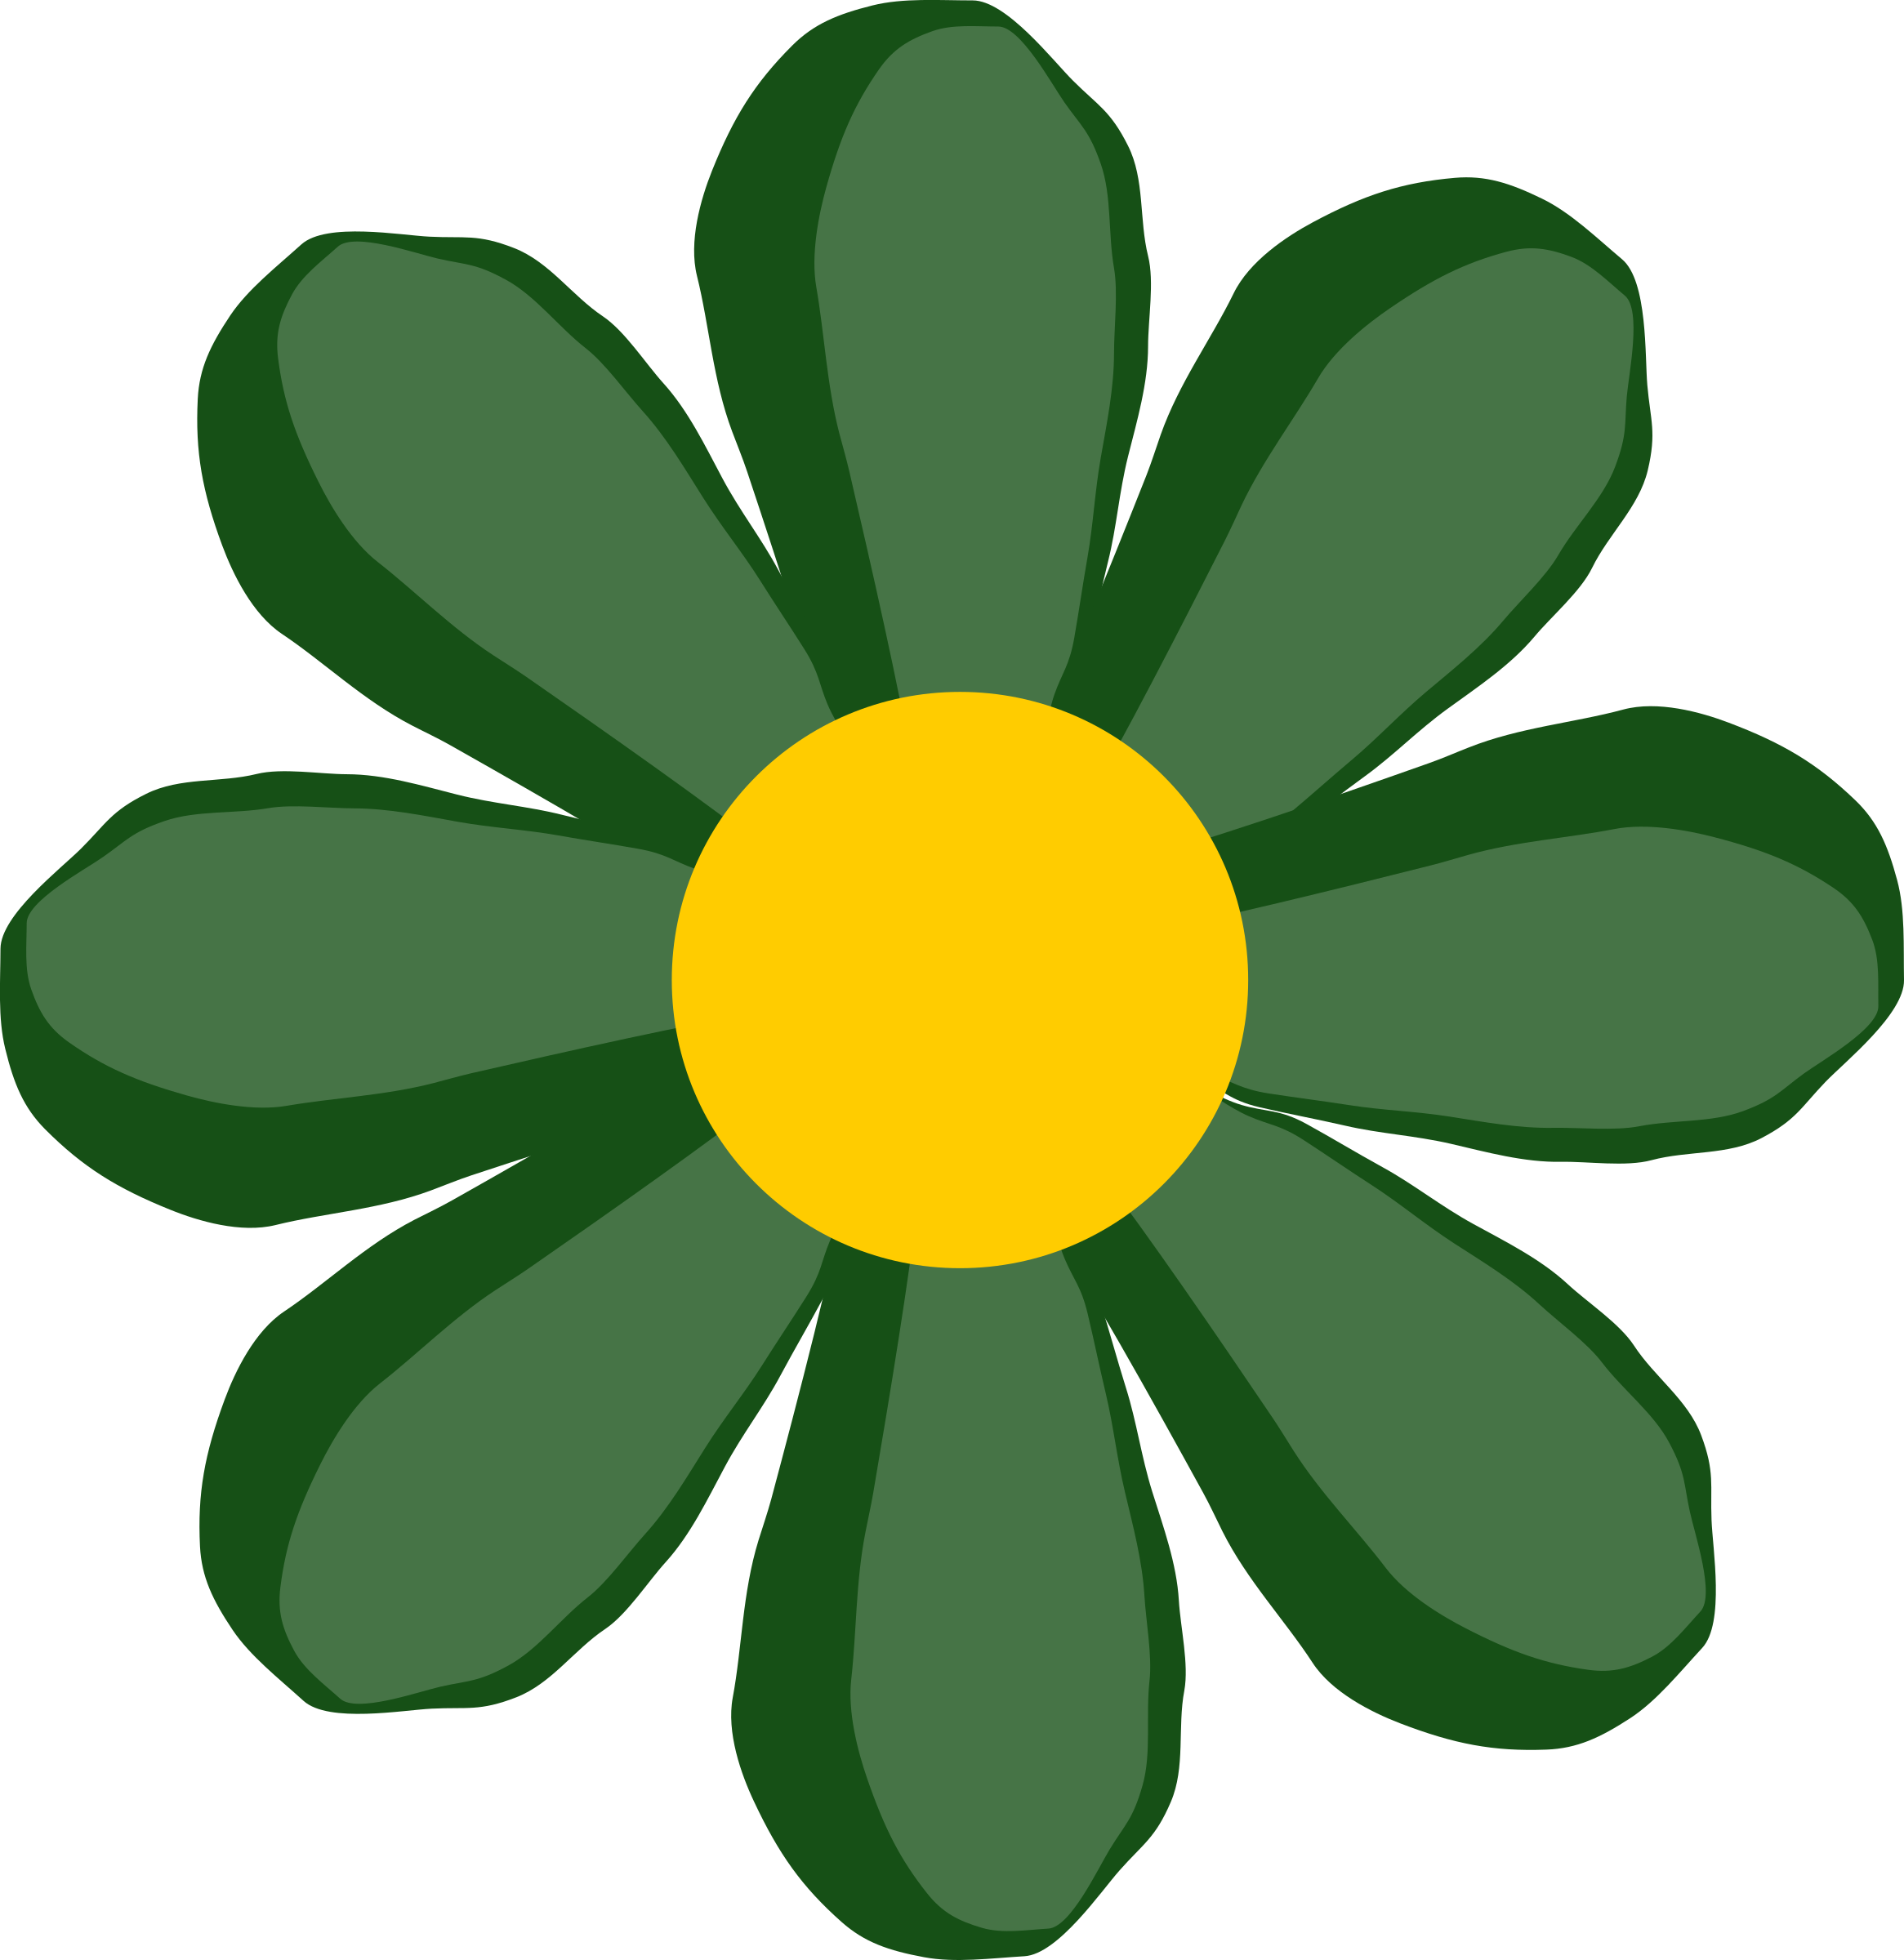 Daisies clipart four flower. Green big image png